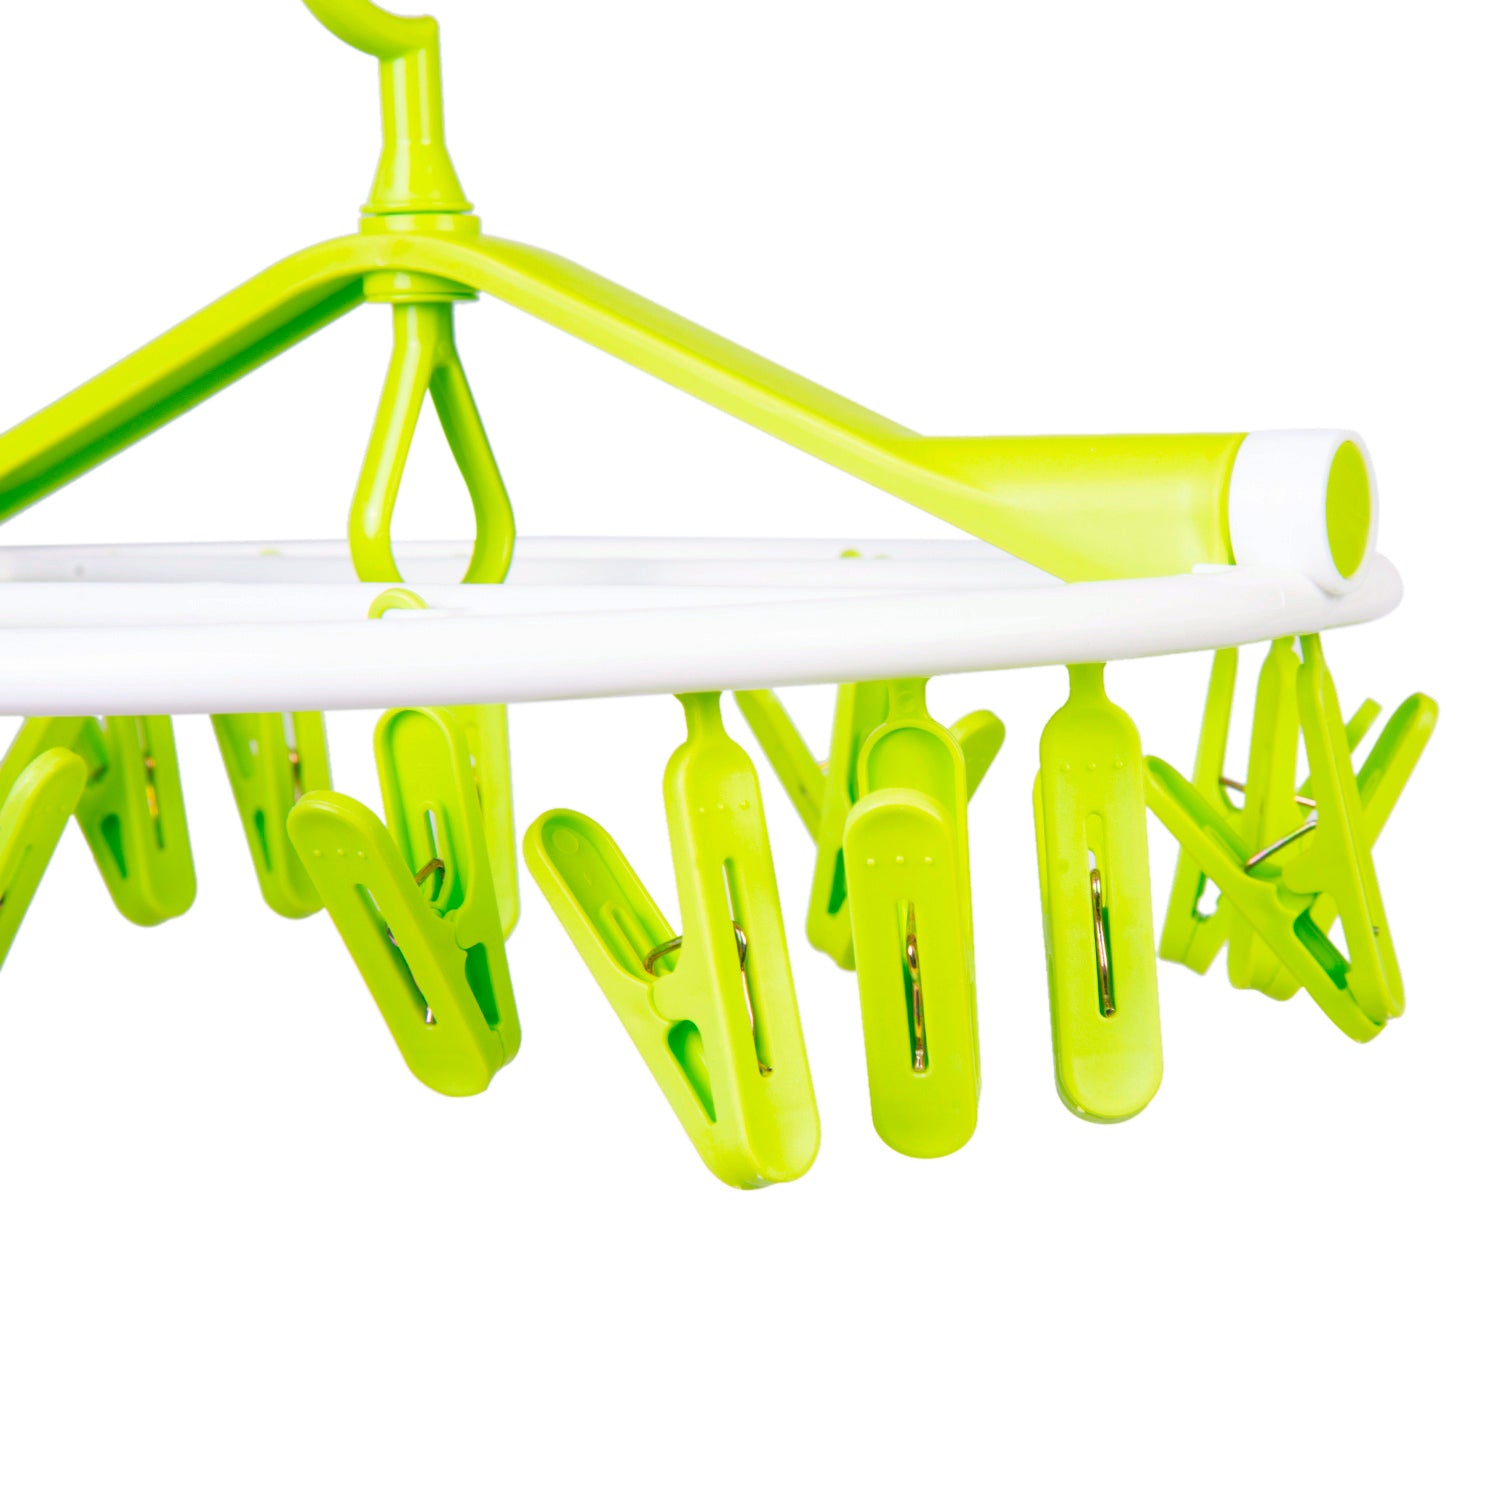 Clothes Hanger Round Foldable 18 Clips Green - Baby Moo